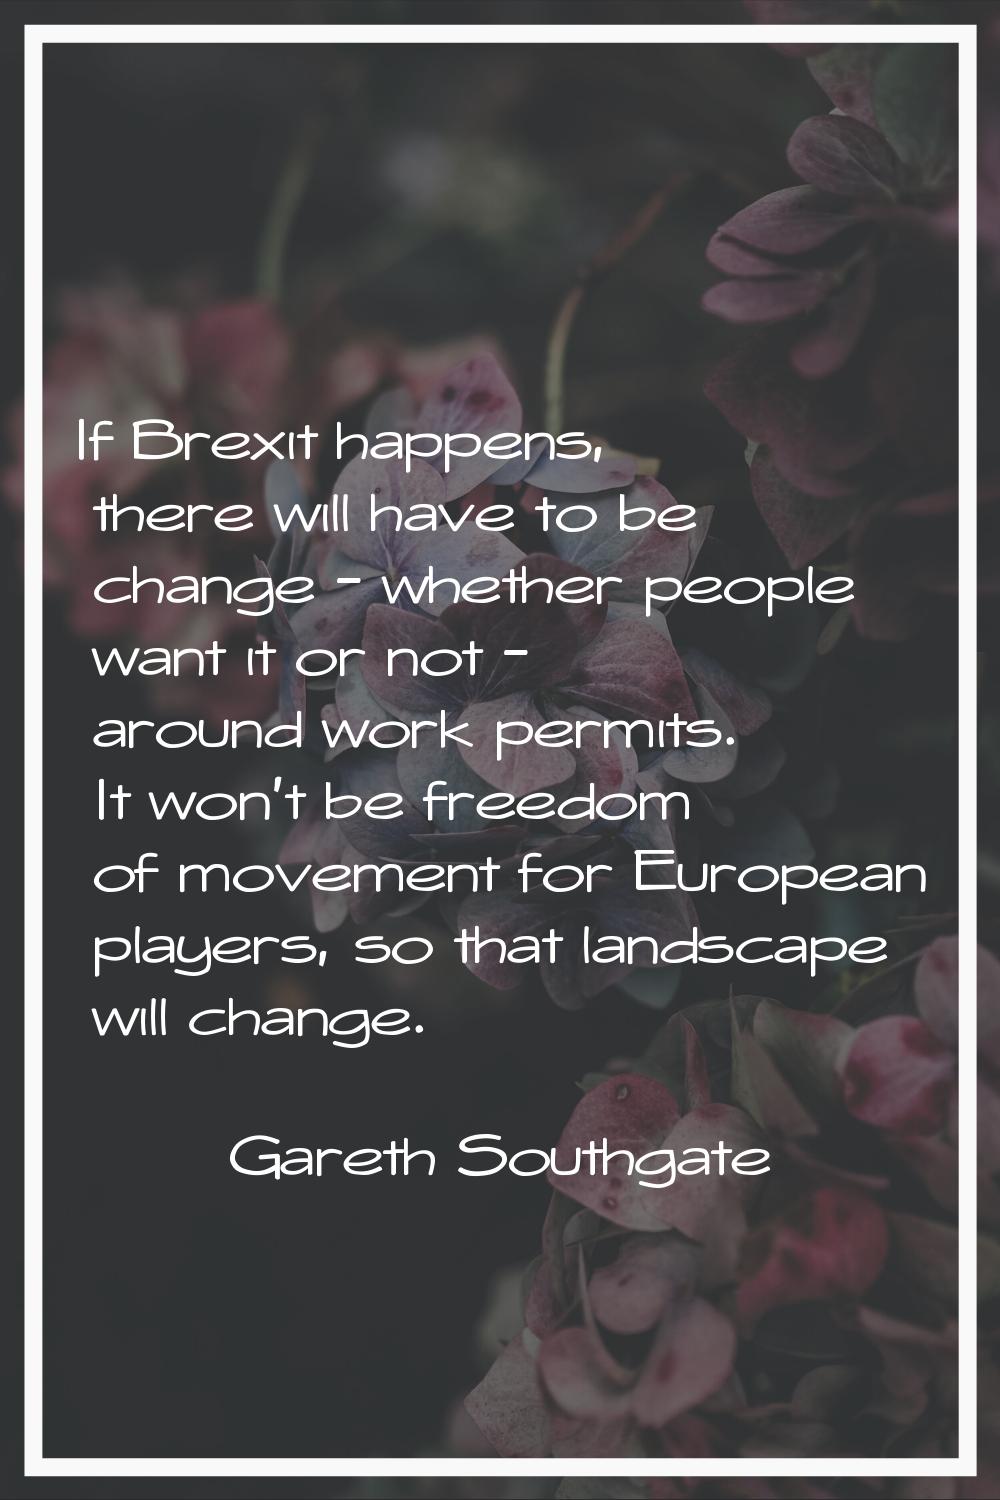 If Brexit happens, there will have to be change - whether people want it or not - around work permi